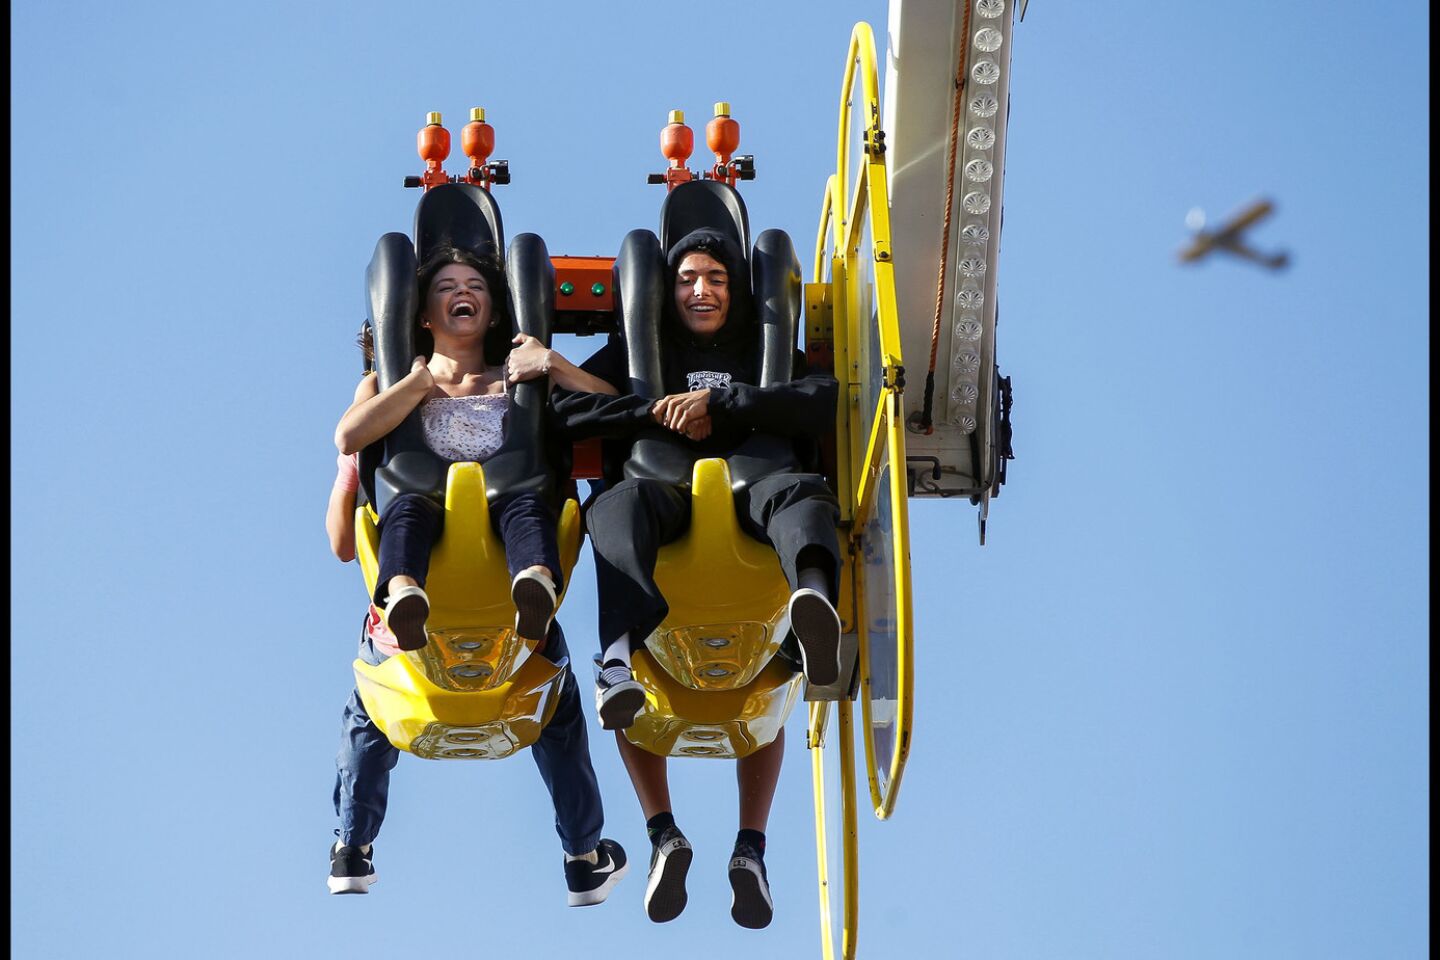 Opening Day of the San Diego County Fair